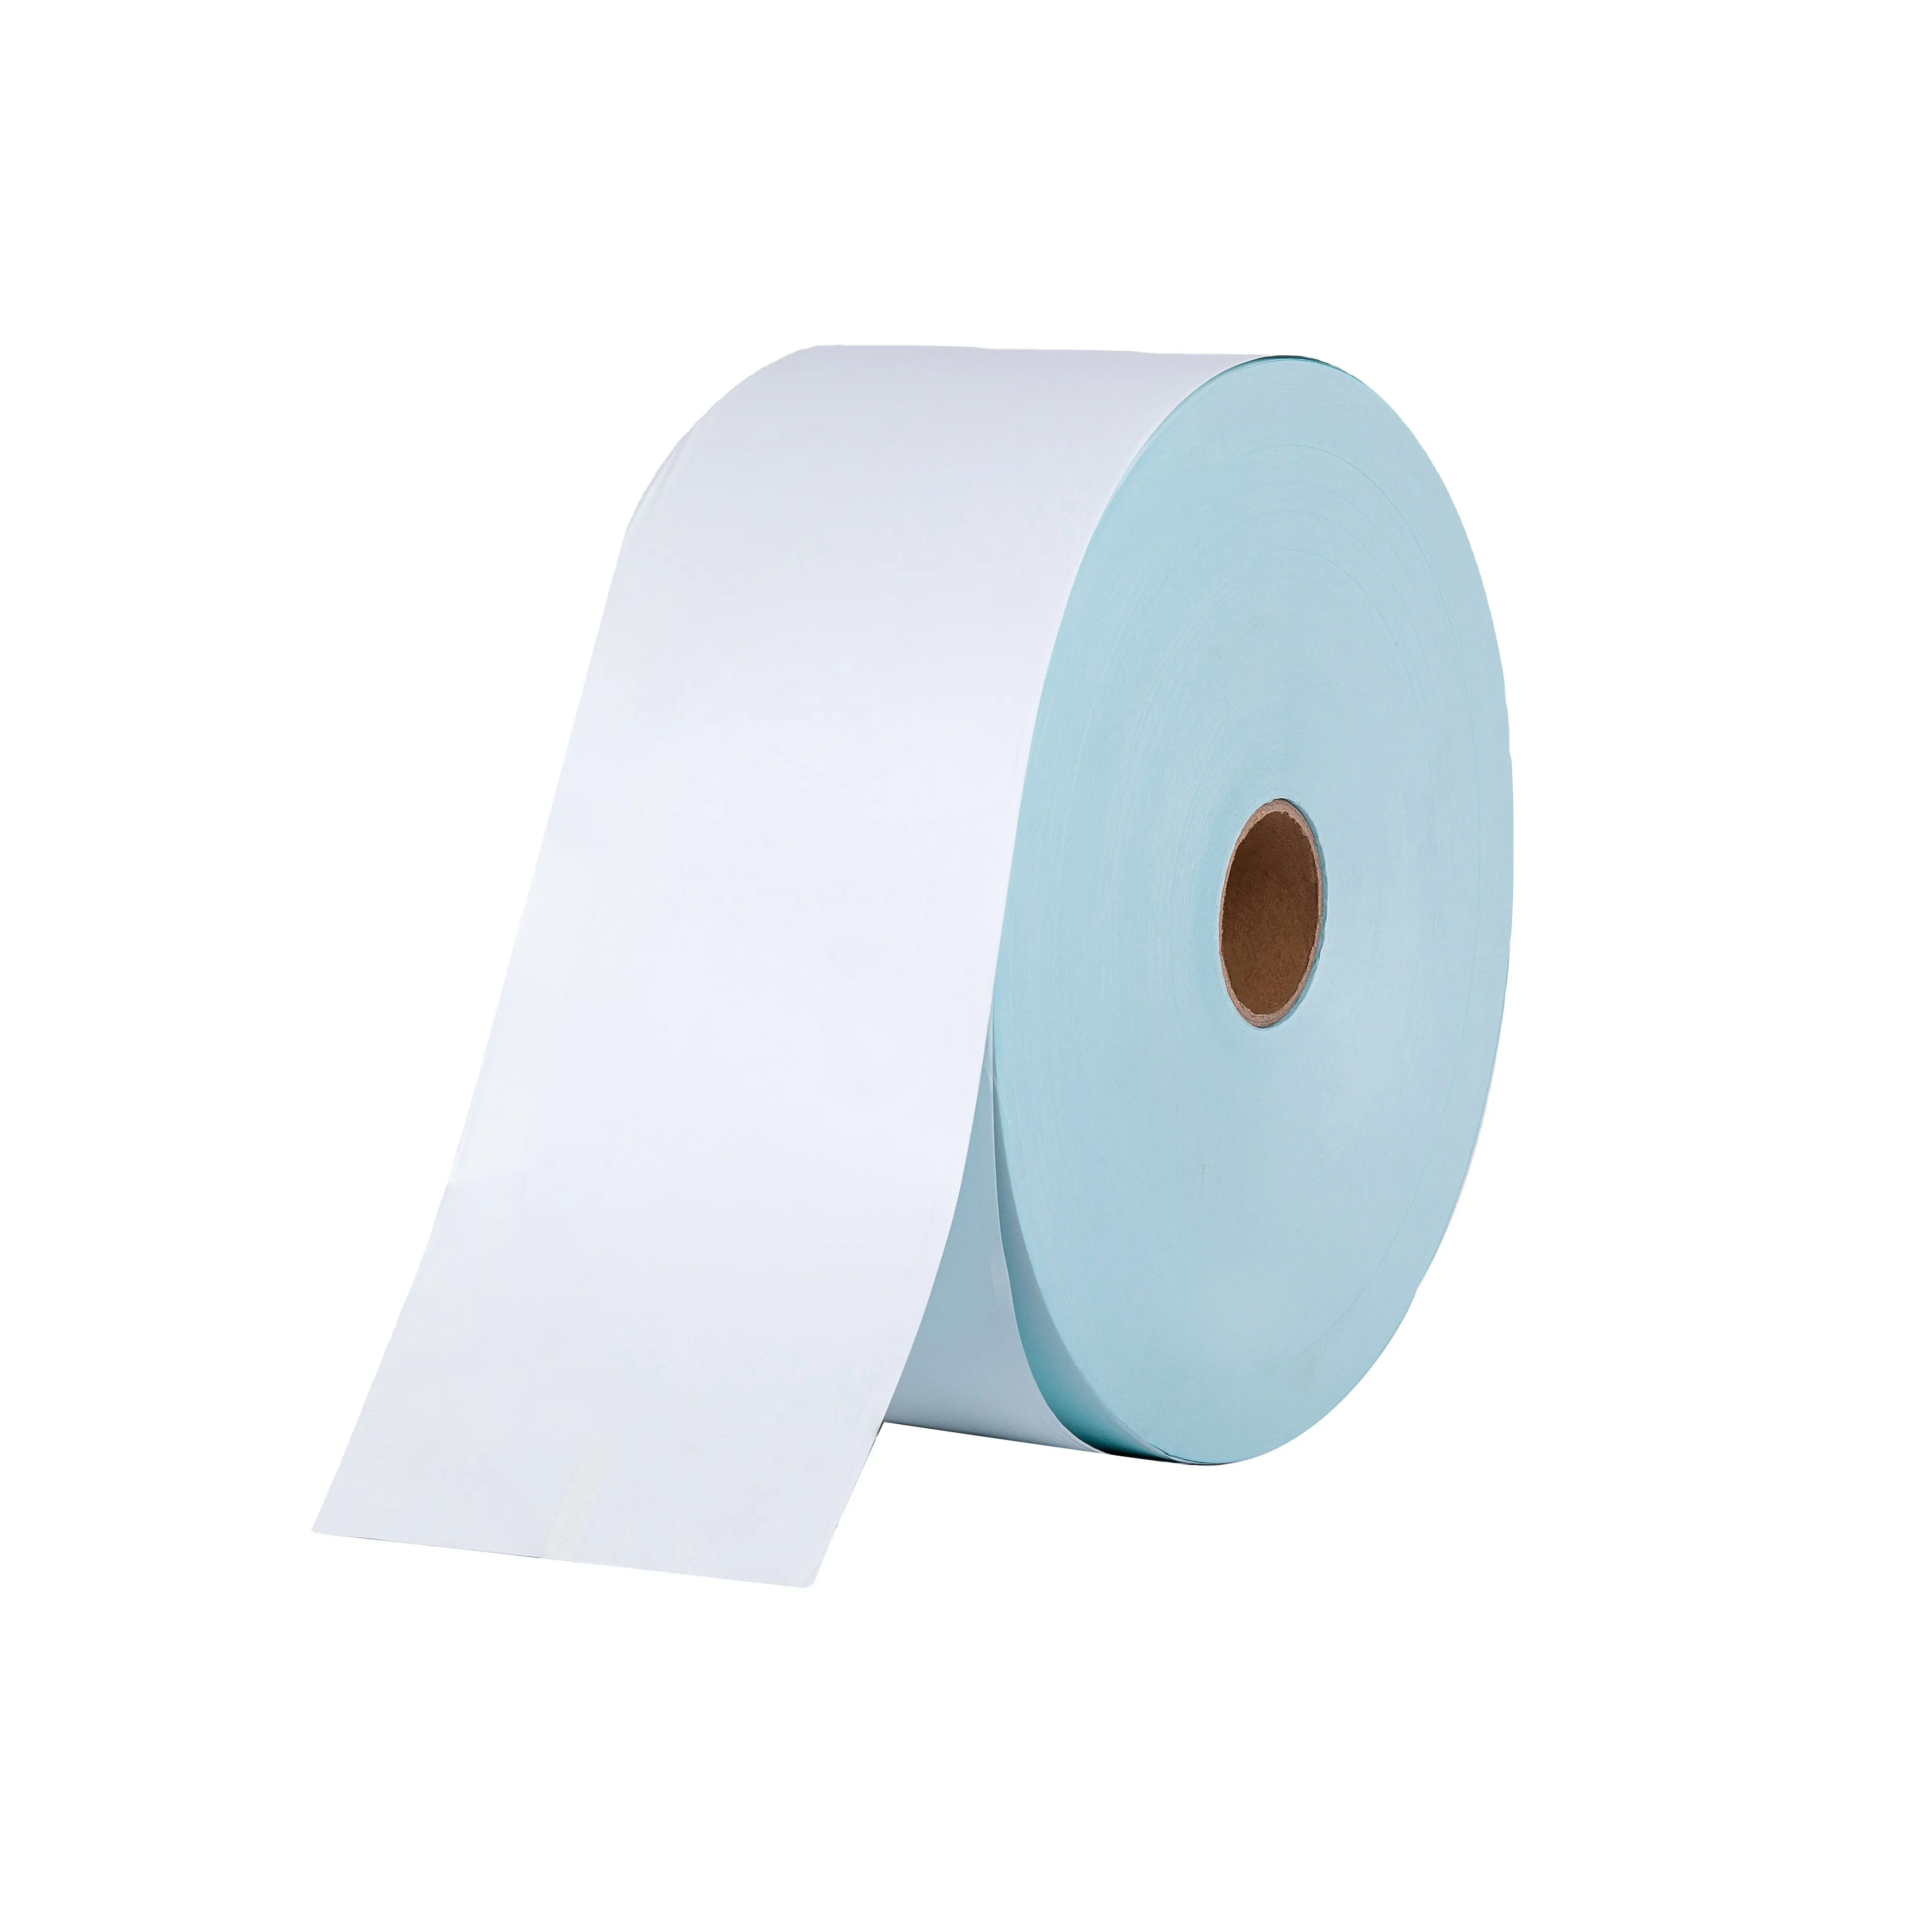 Factory direct sell 3 proofs thermal adhesive sticker material blue base label barcode making material XZRJ-3A80